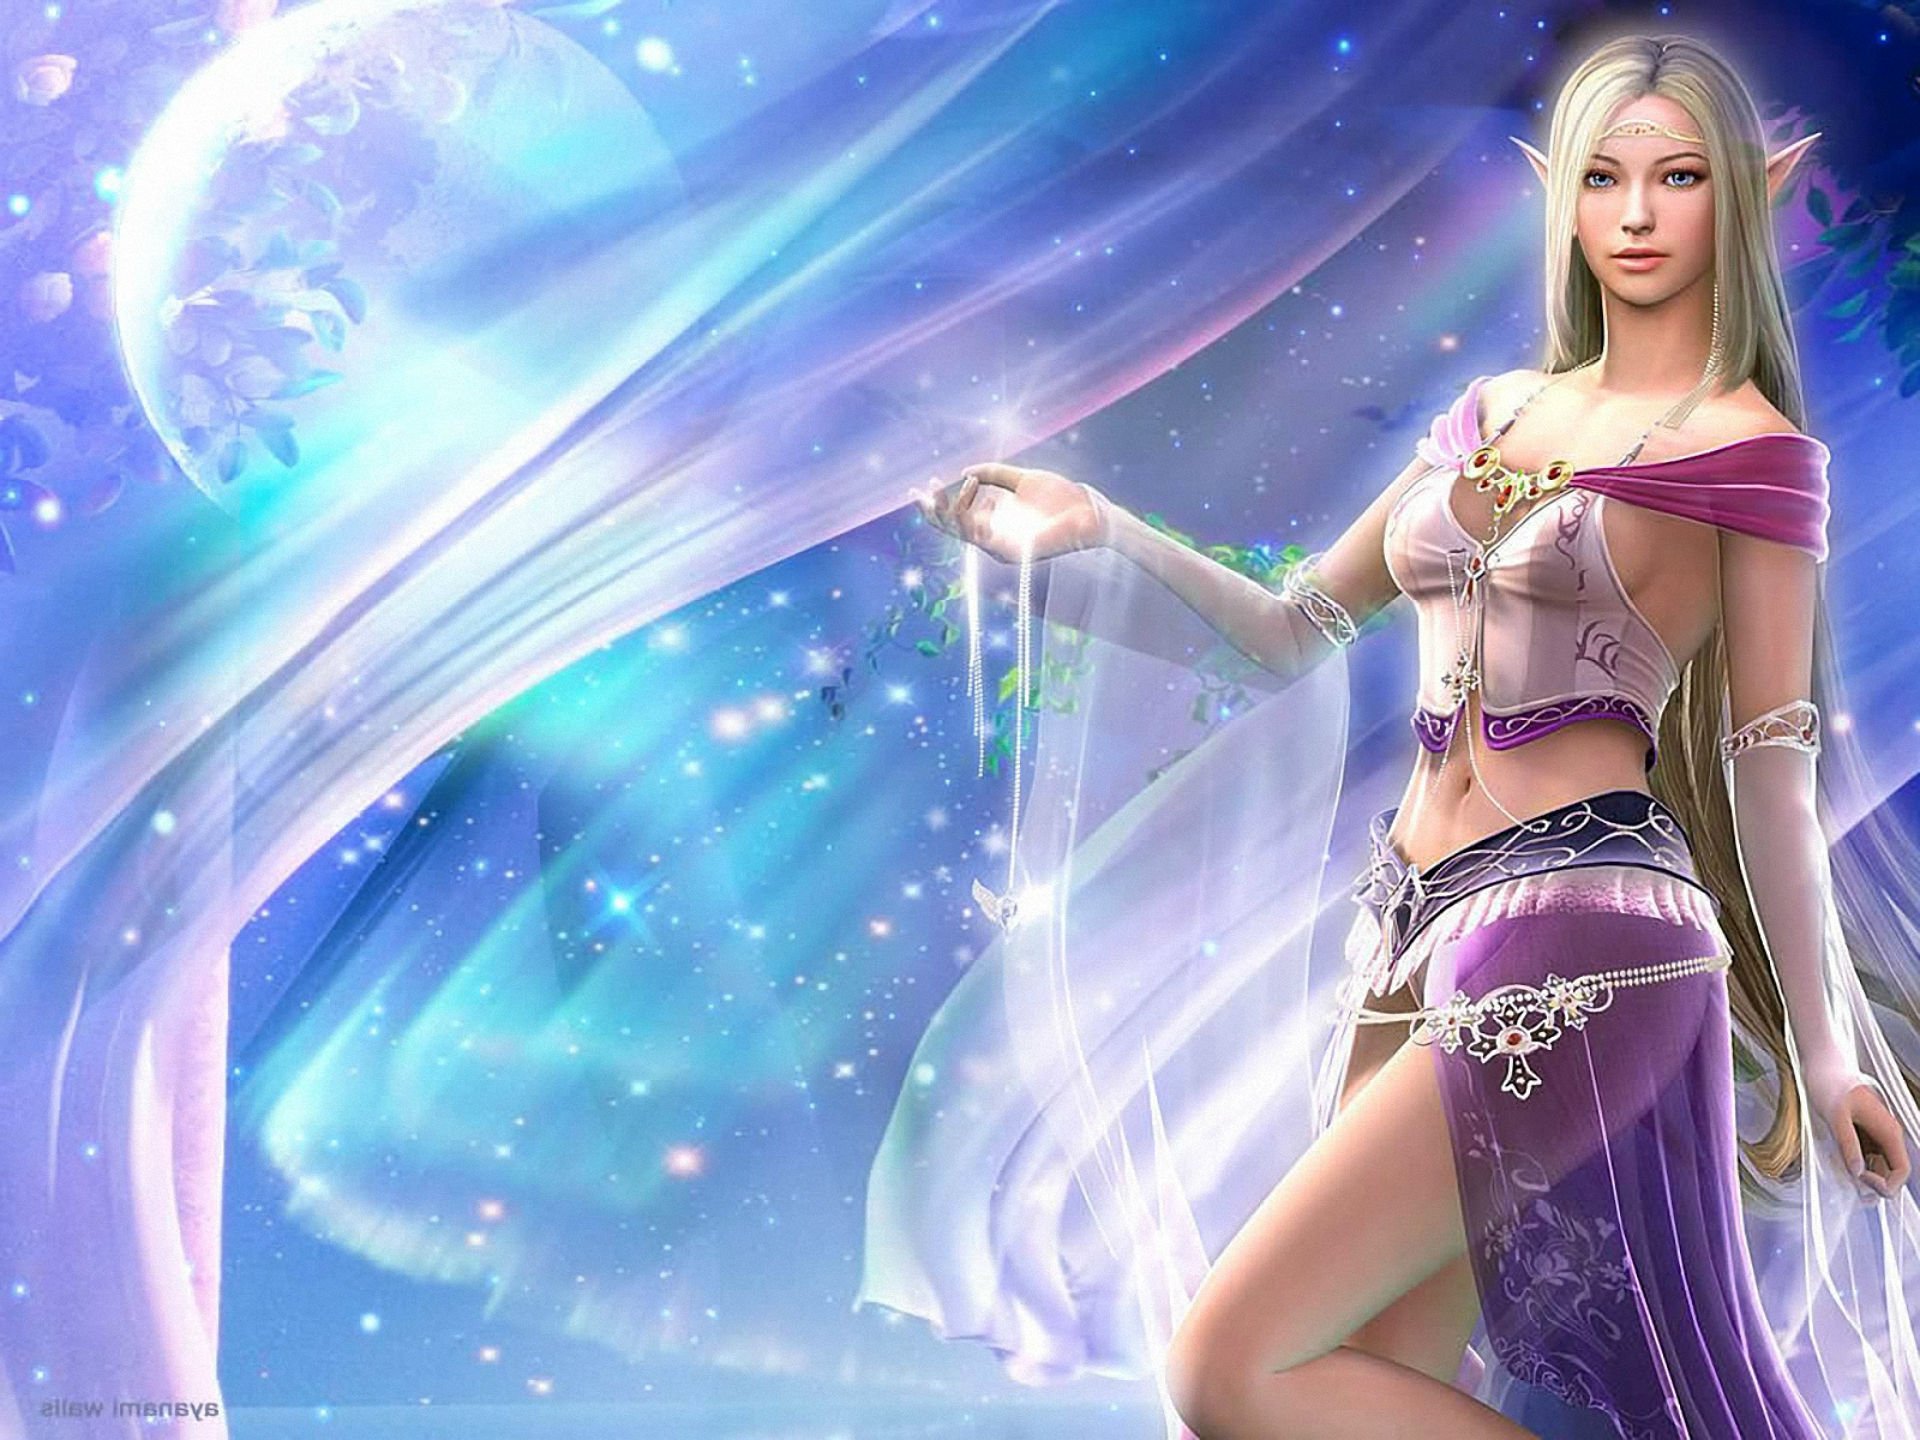 last, Chaos, Fantasy, Mmo, Rpg, Action, Fighting, 1lchaos, Action, Warrior, Dungeon, Adventure, Online, Babe, Girl, Girls, Elf, Elves Wallpaper